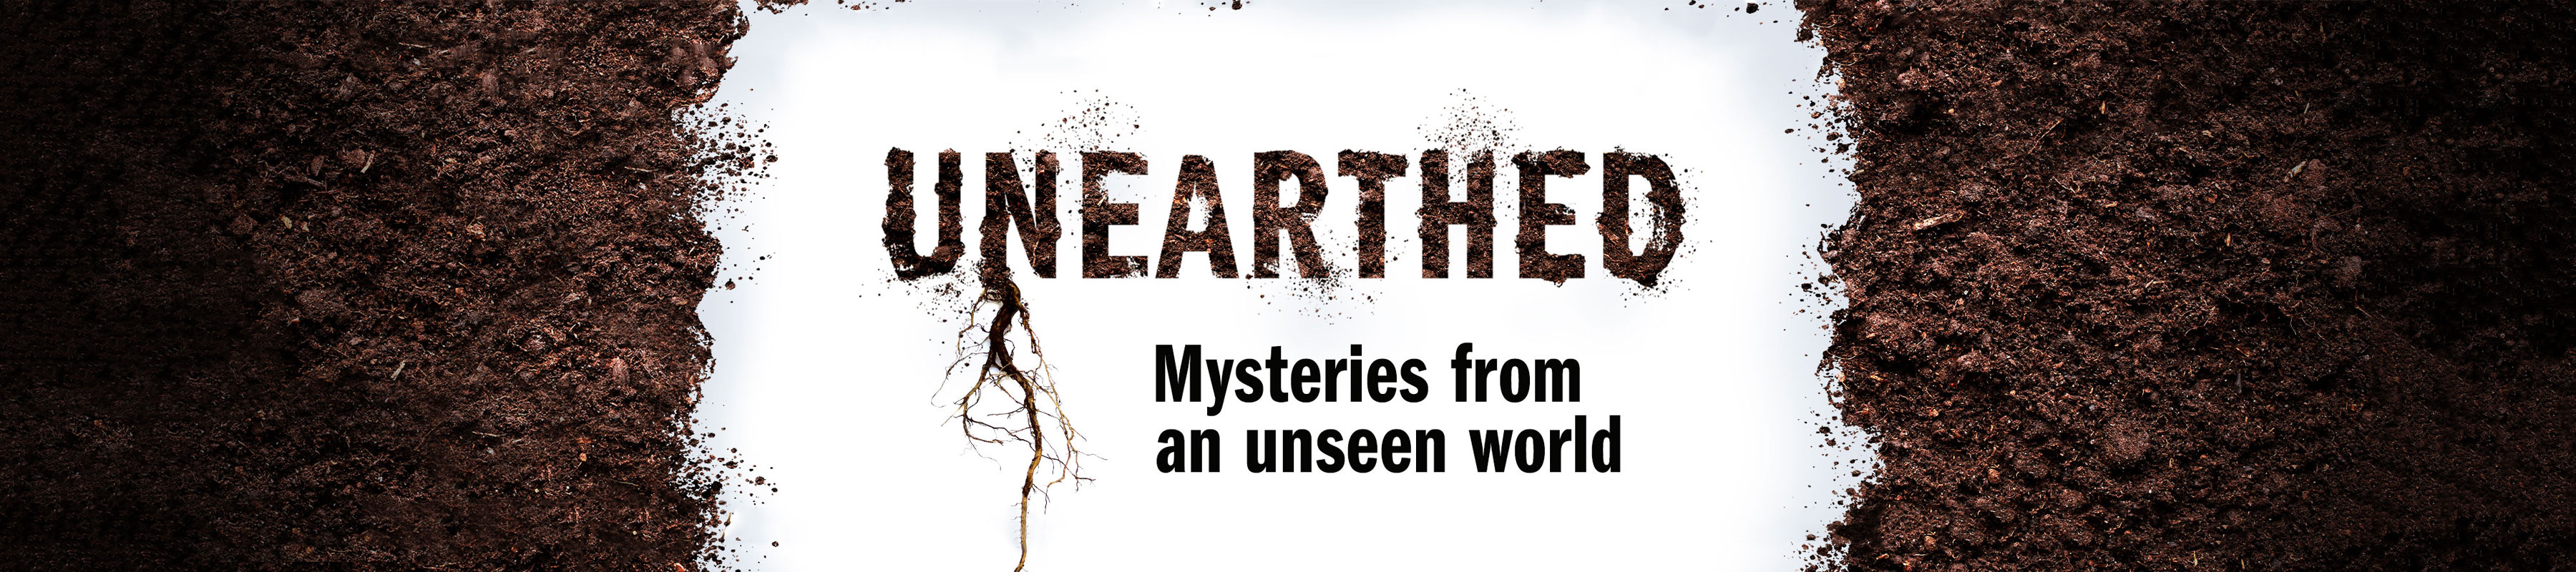 The logo for the Unearthed podcast, which is the word 'Unearthed' written in soil, with the text 'Mysteries from an unseen world'